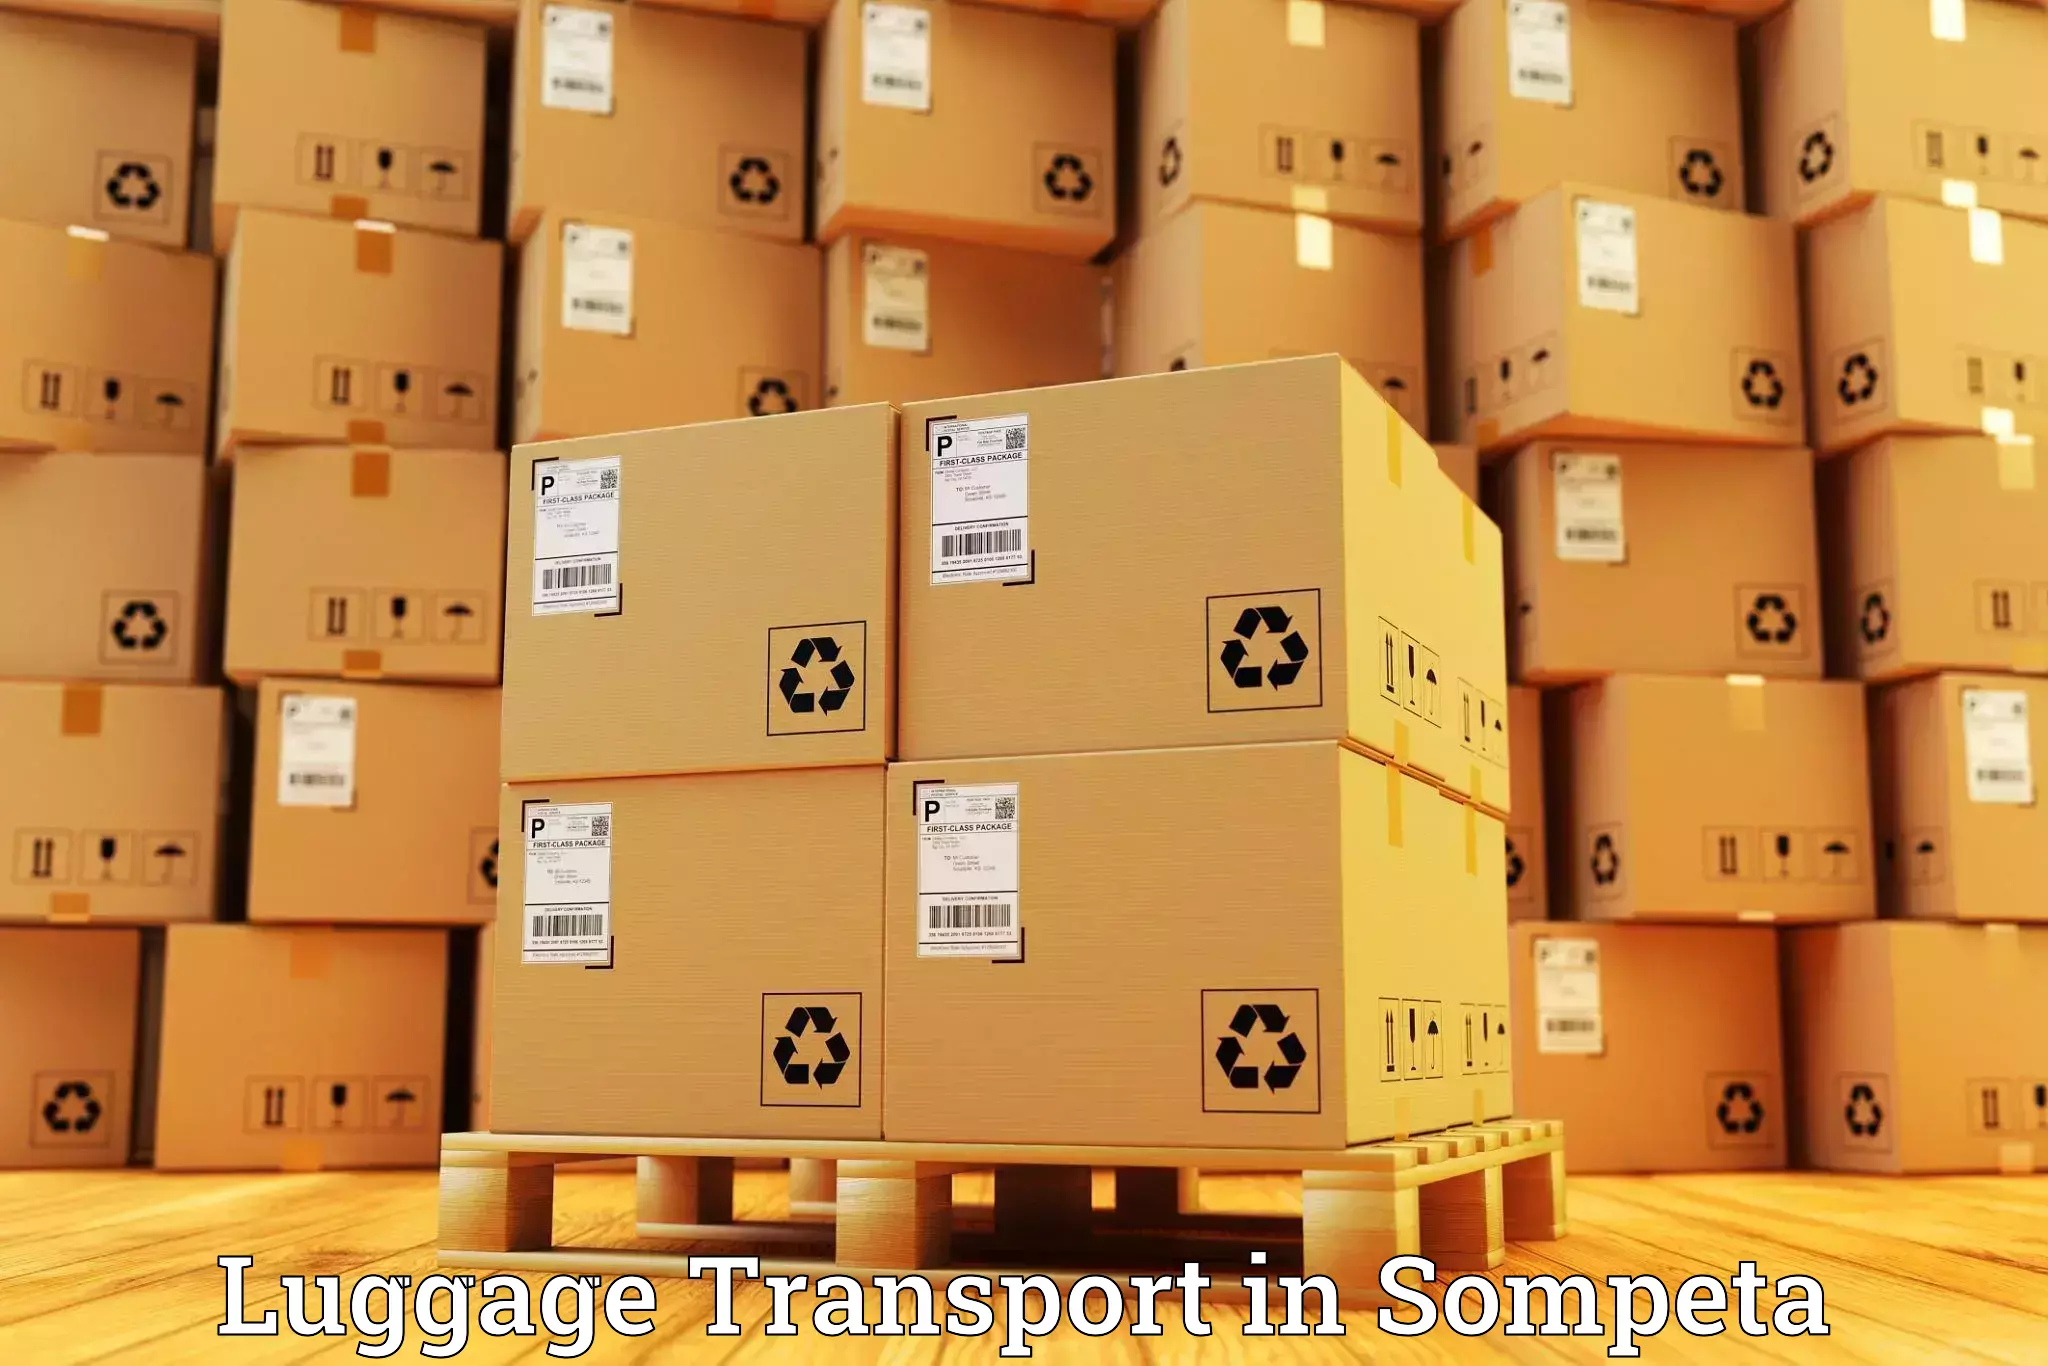 Luggage transport operations in Sompeta